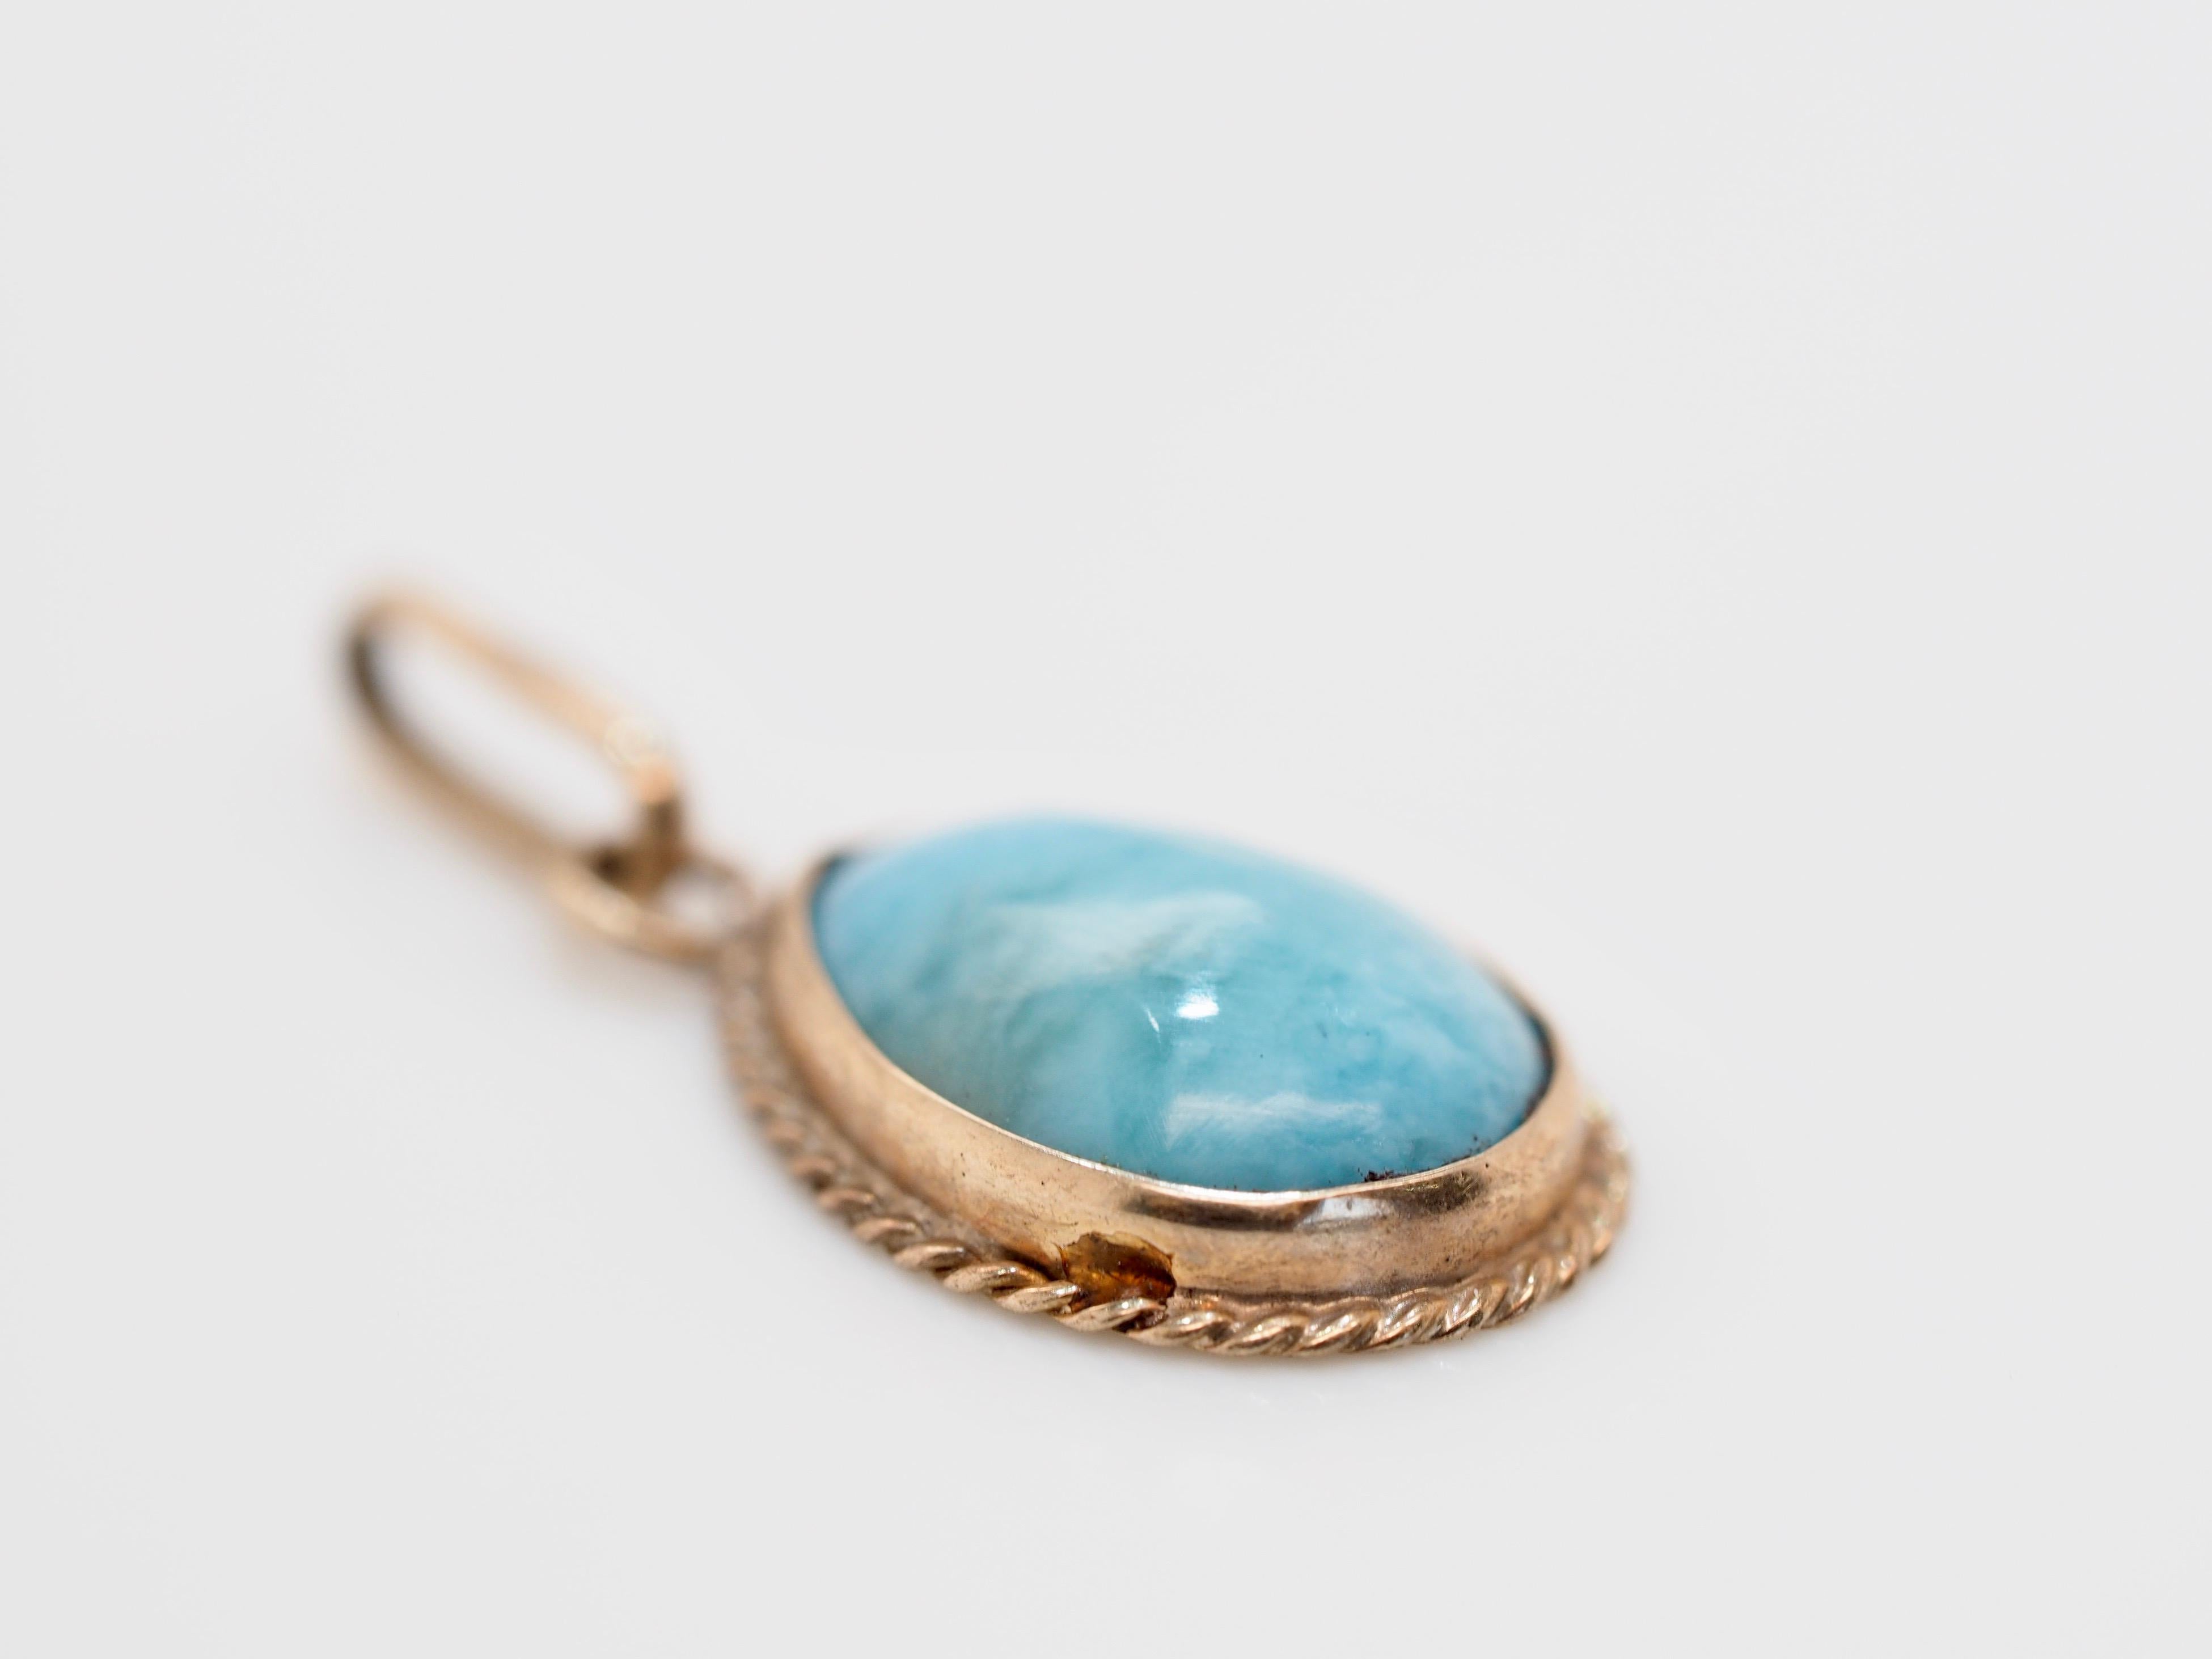 This charming little turquoise teardrop pendant would make a lovely addition to any vintage lovers jewelry collection. Featuring a natural turquoise cabochon teardrop wrapped in a classic 14K Yellow Gold rope styled bezel. With the addition of a 14K